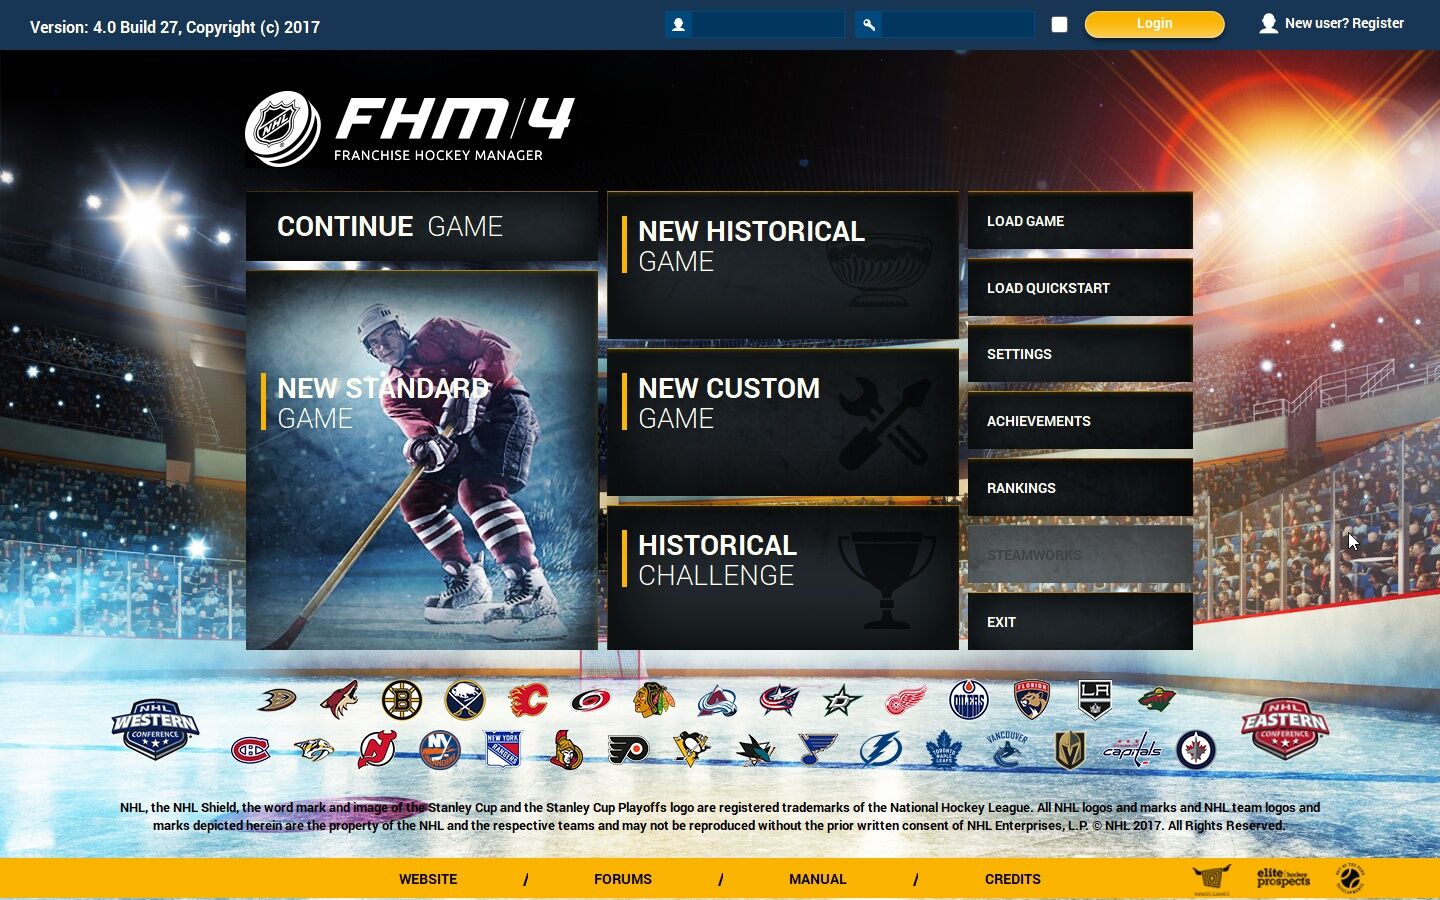 Franchise Hockey Manager 4 Review